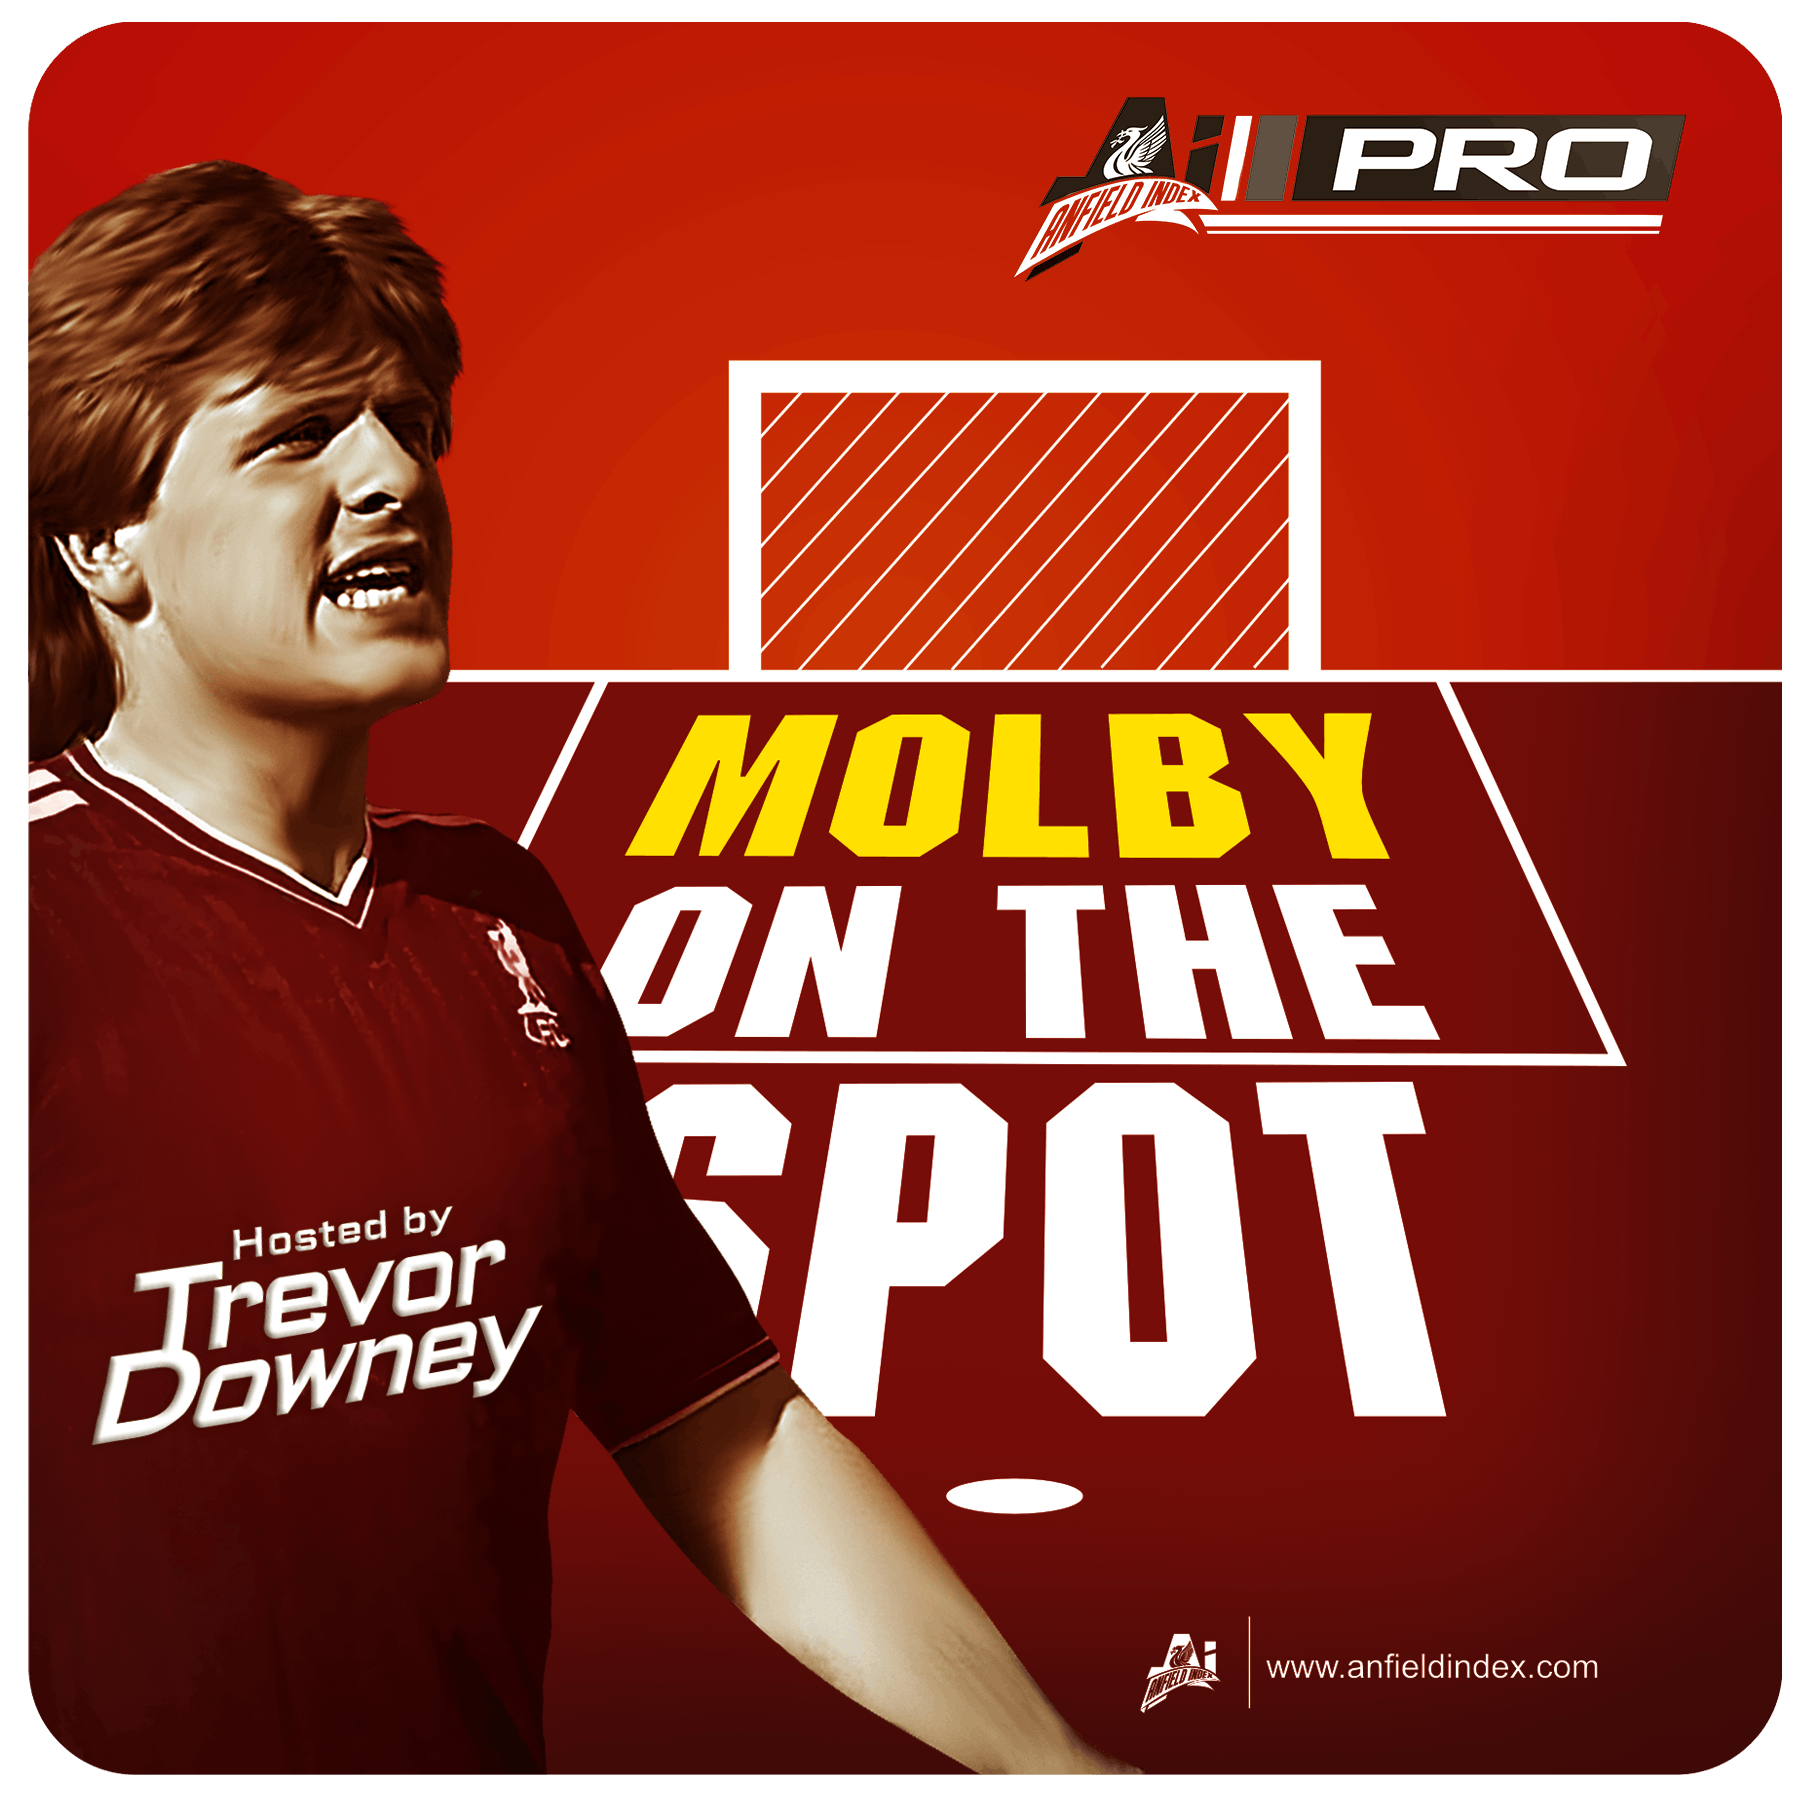 One Last Chance - Molby On The Spot 